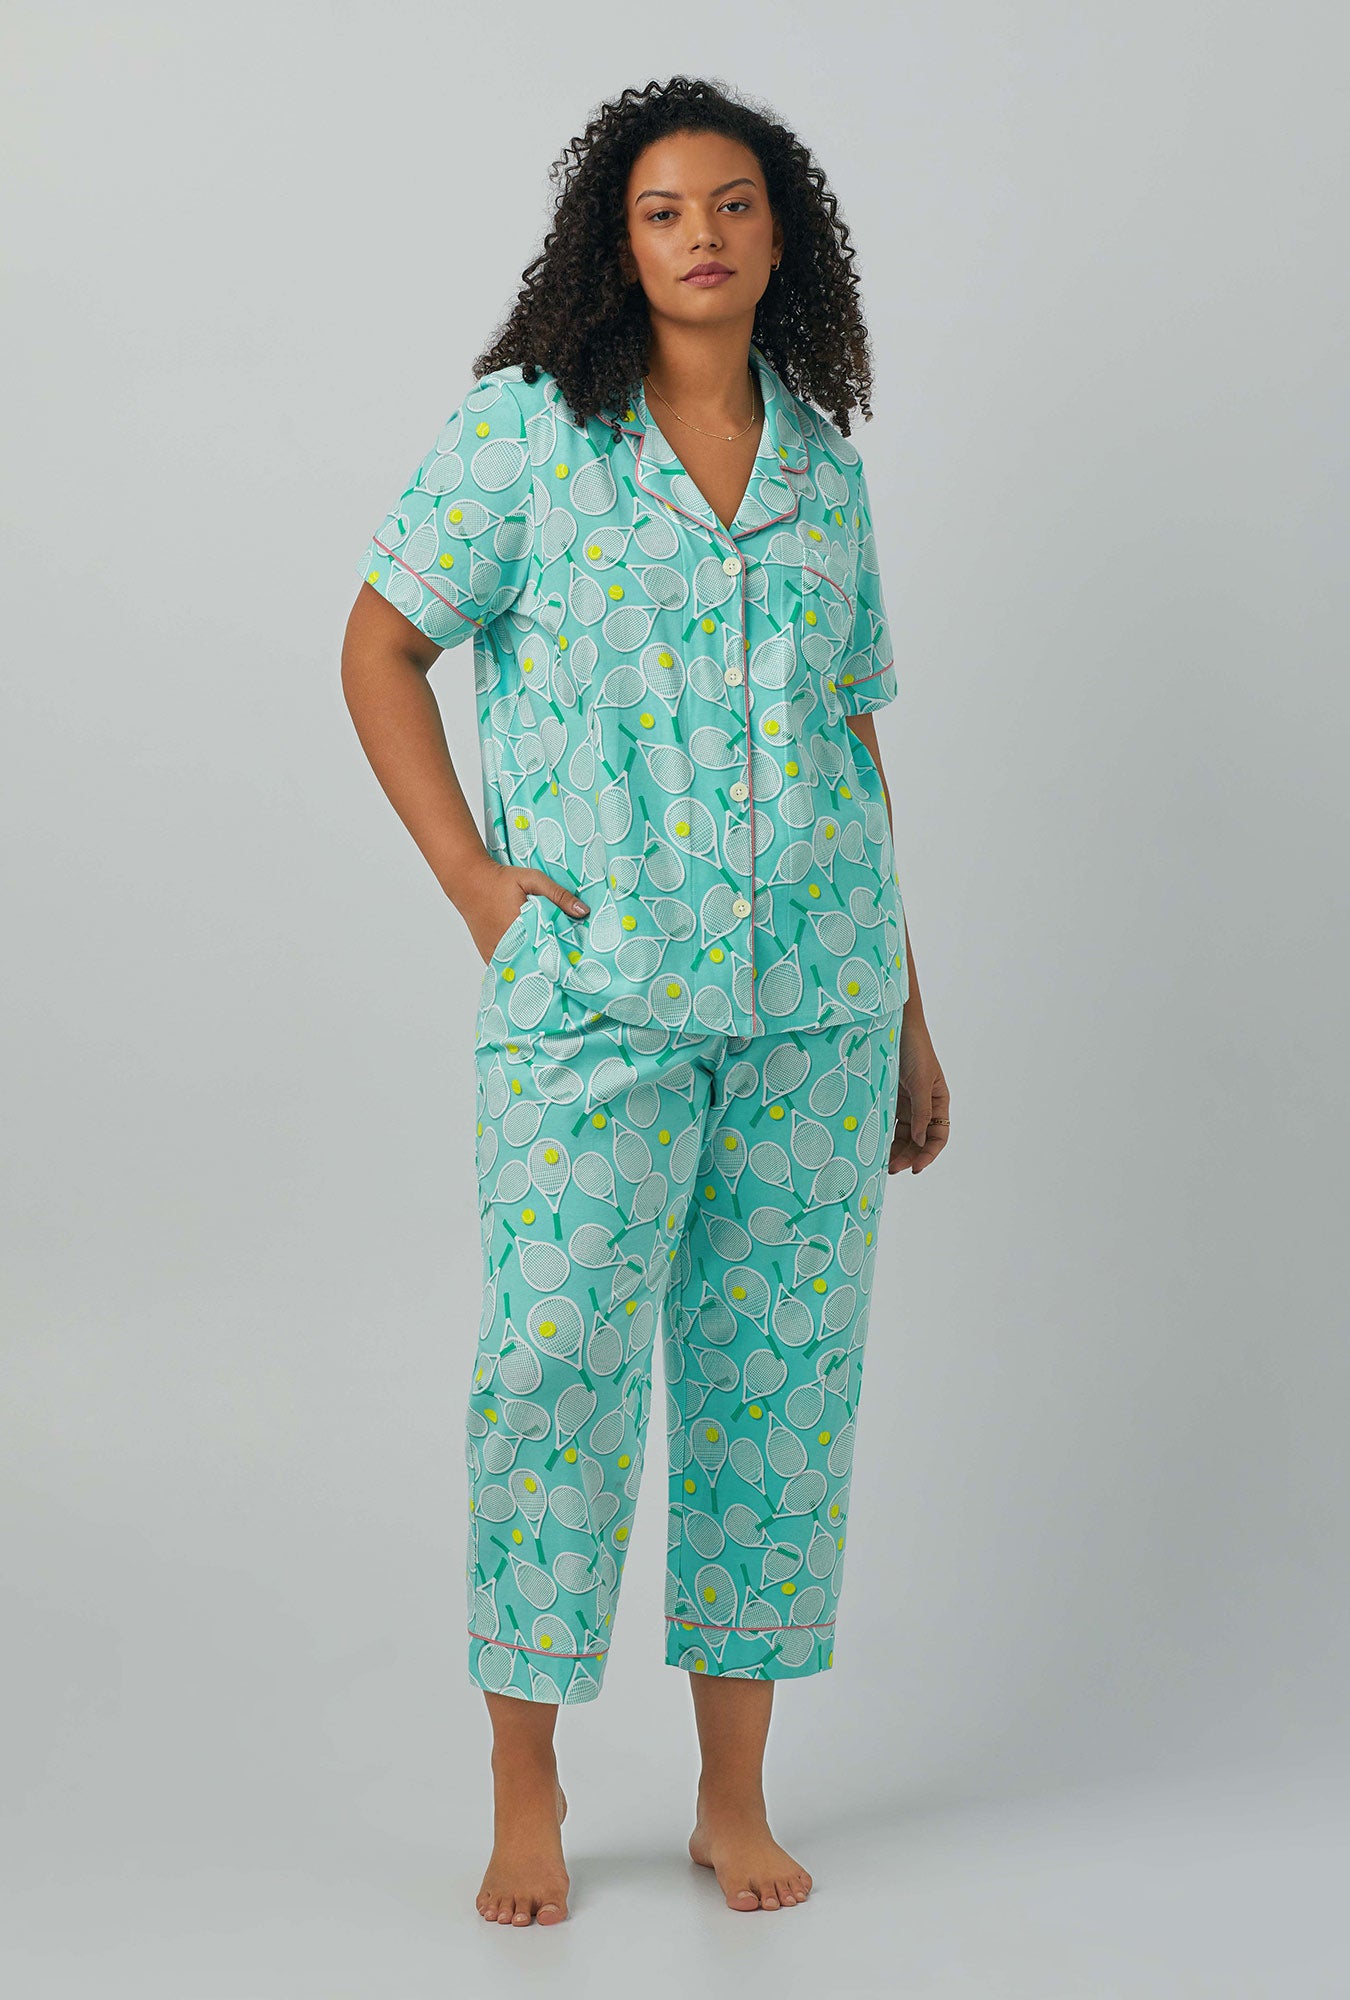 A lady wearing green Short Sleeve Classic Stretch Jersey Cropped PJ Set with Tennis Club print